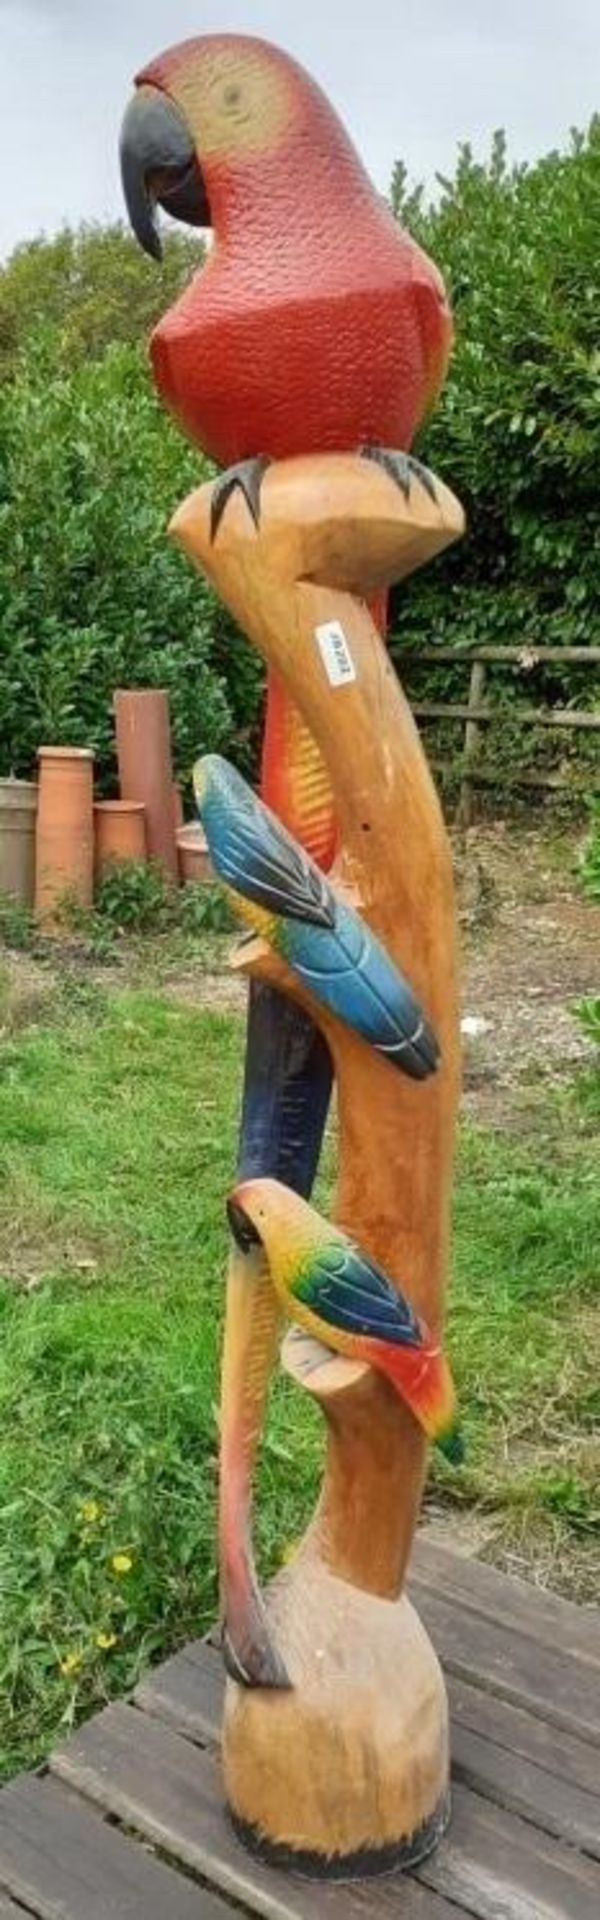 1 x 1.7-Metre Tall Wooden Sculpture Featuring 3 Colourful Parrots - Dimensions: Height 170cm x